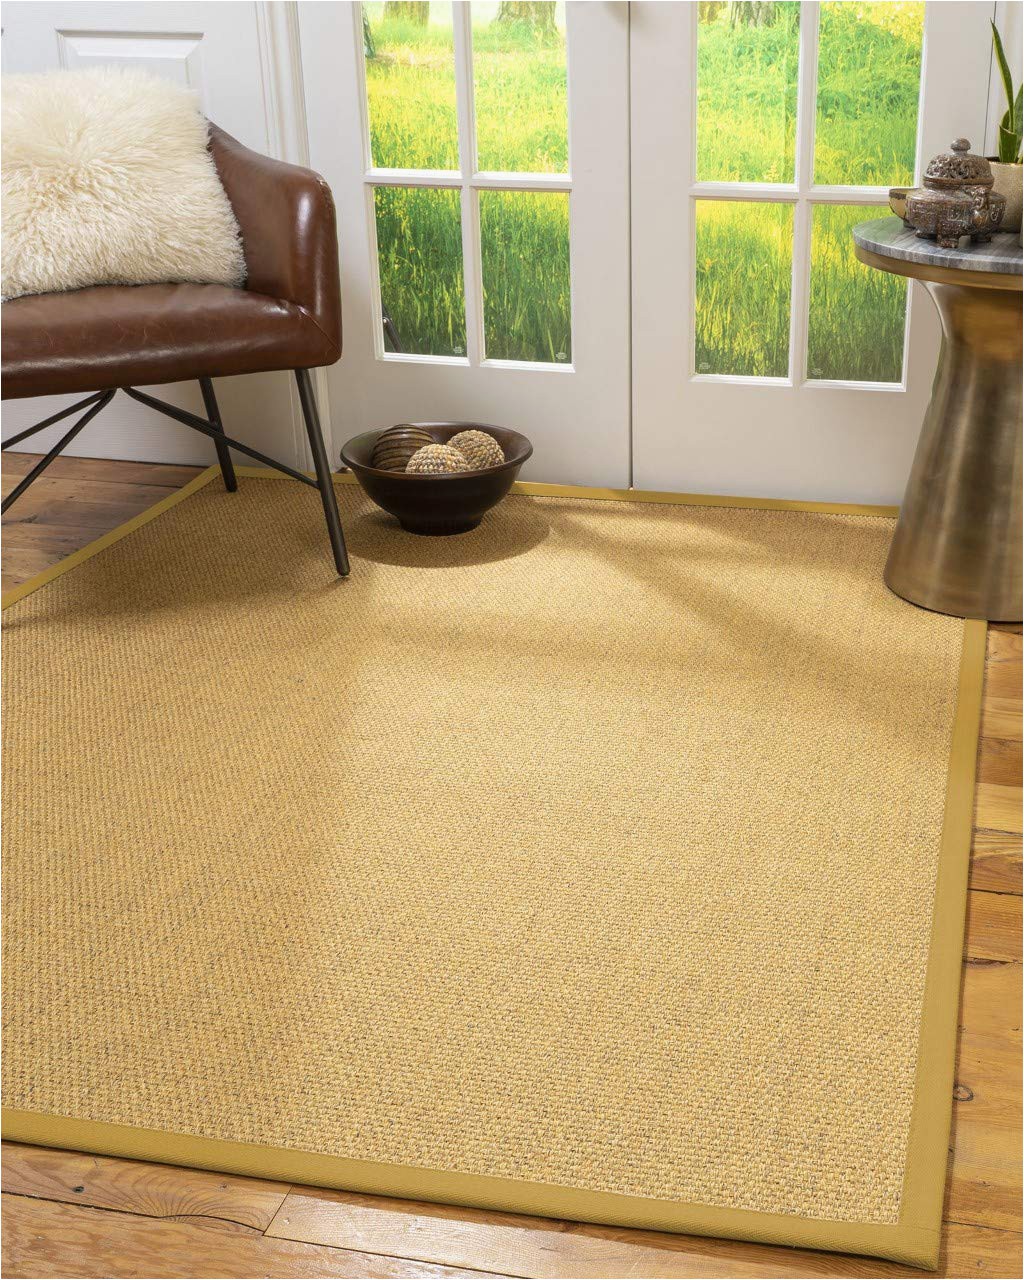 Extra Large Square area Rugs Buy Natural area Rugs Avondale Beige Sisal Rug 10 Square